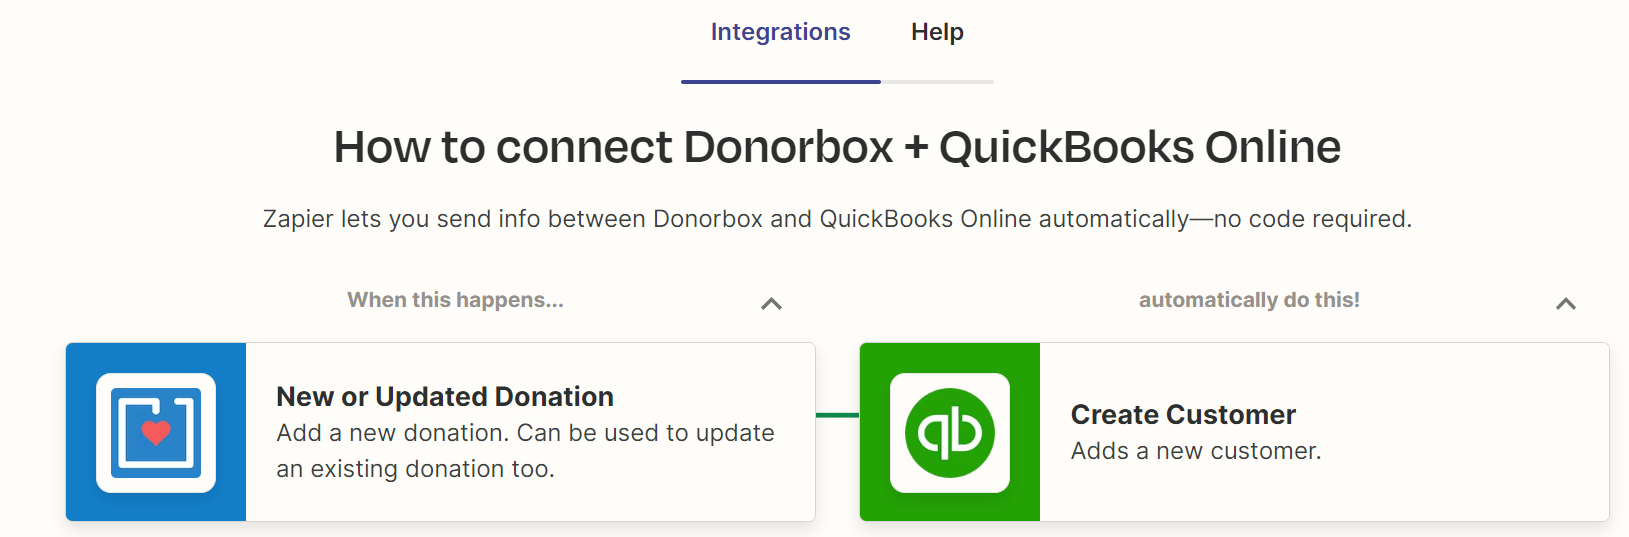 quickbooks for churches - Donorbox integration